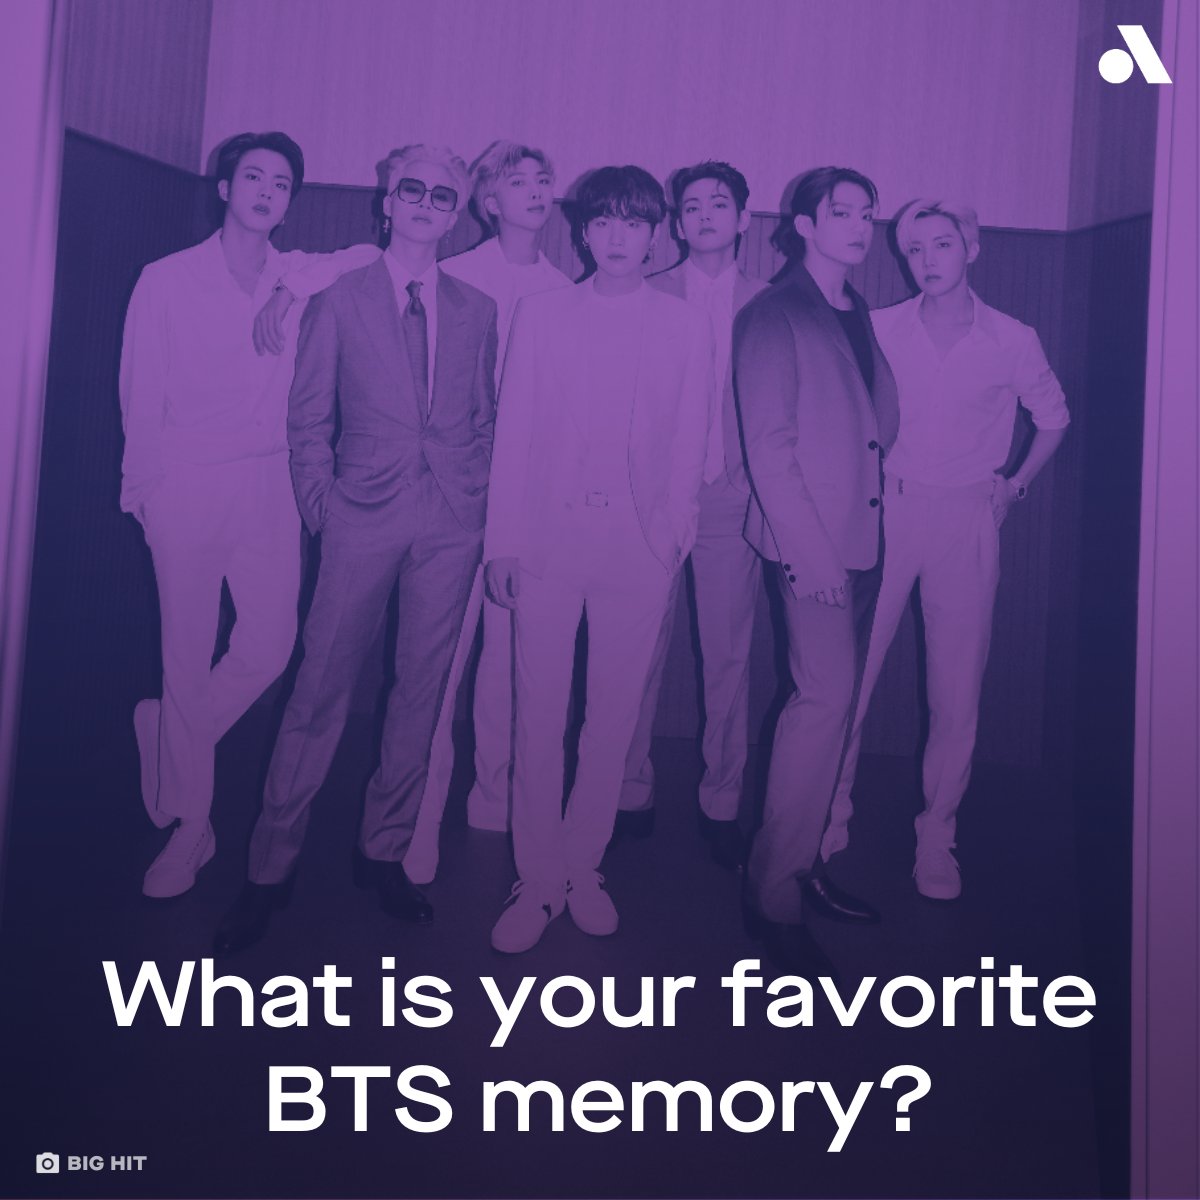 In honor of #AAPIHeritageMonth - Drop your fave 💜 @bts_bighit 💜 memory and turn up 'AAPI' Radio: auda.cy/AAPIRadio